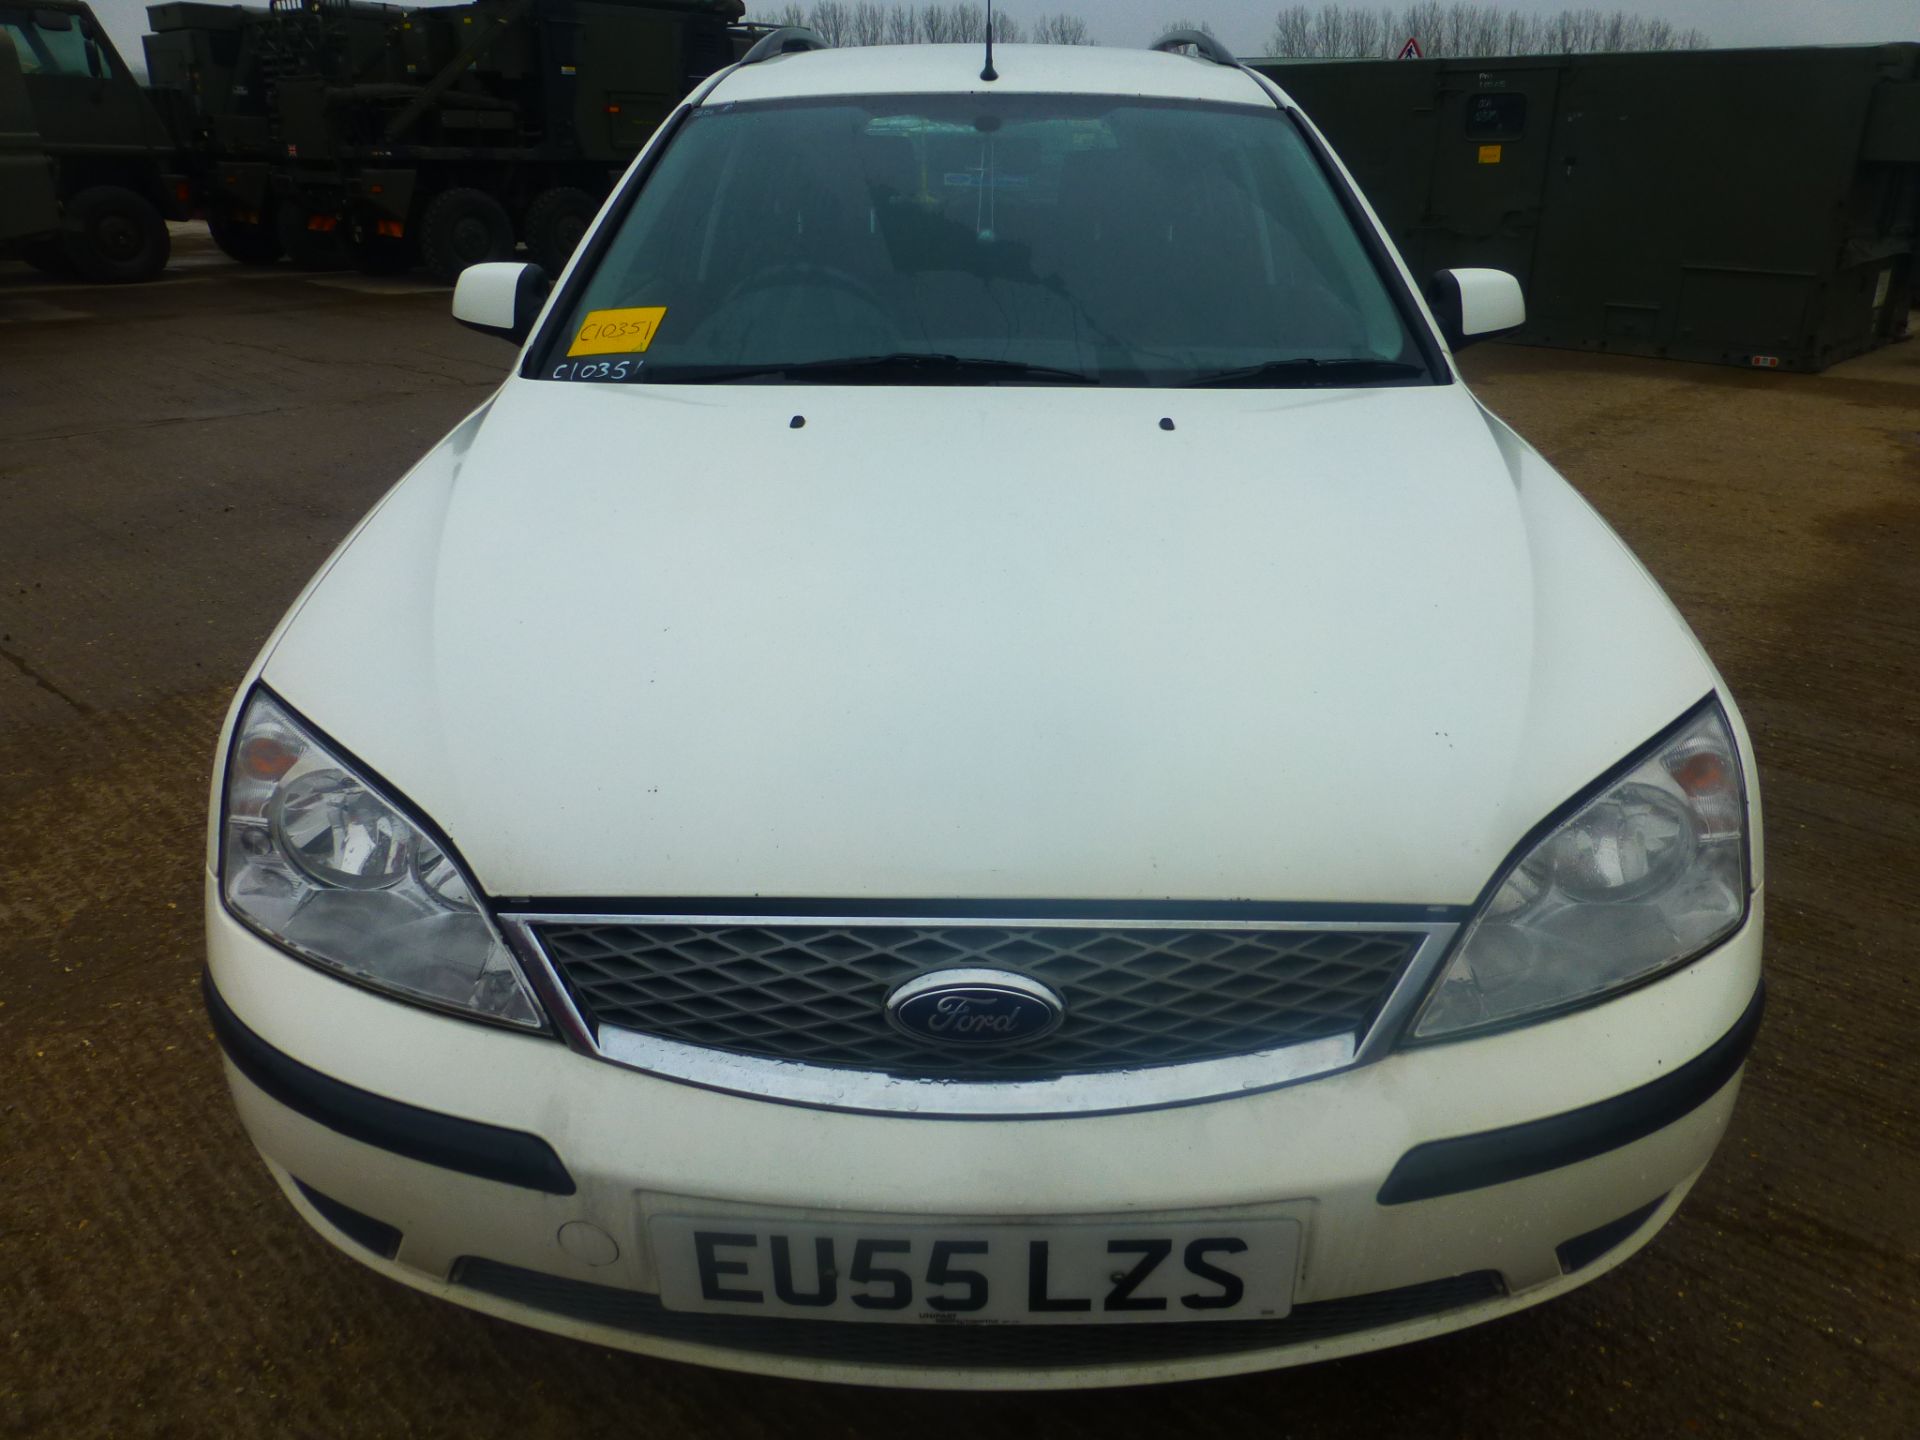 Ford Mondeo 2.0TDCi Estate - Image 2 of 16